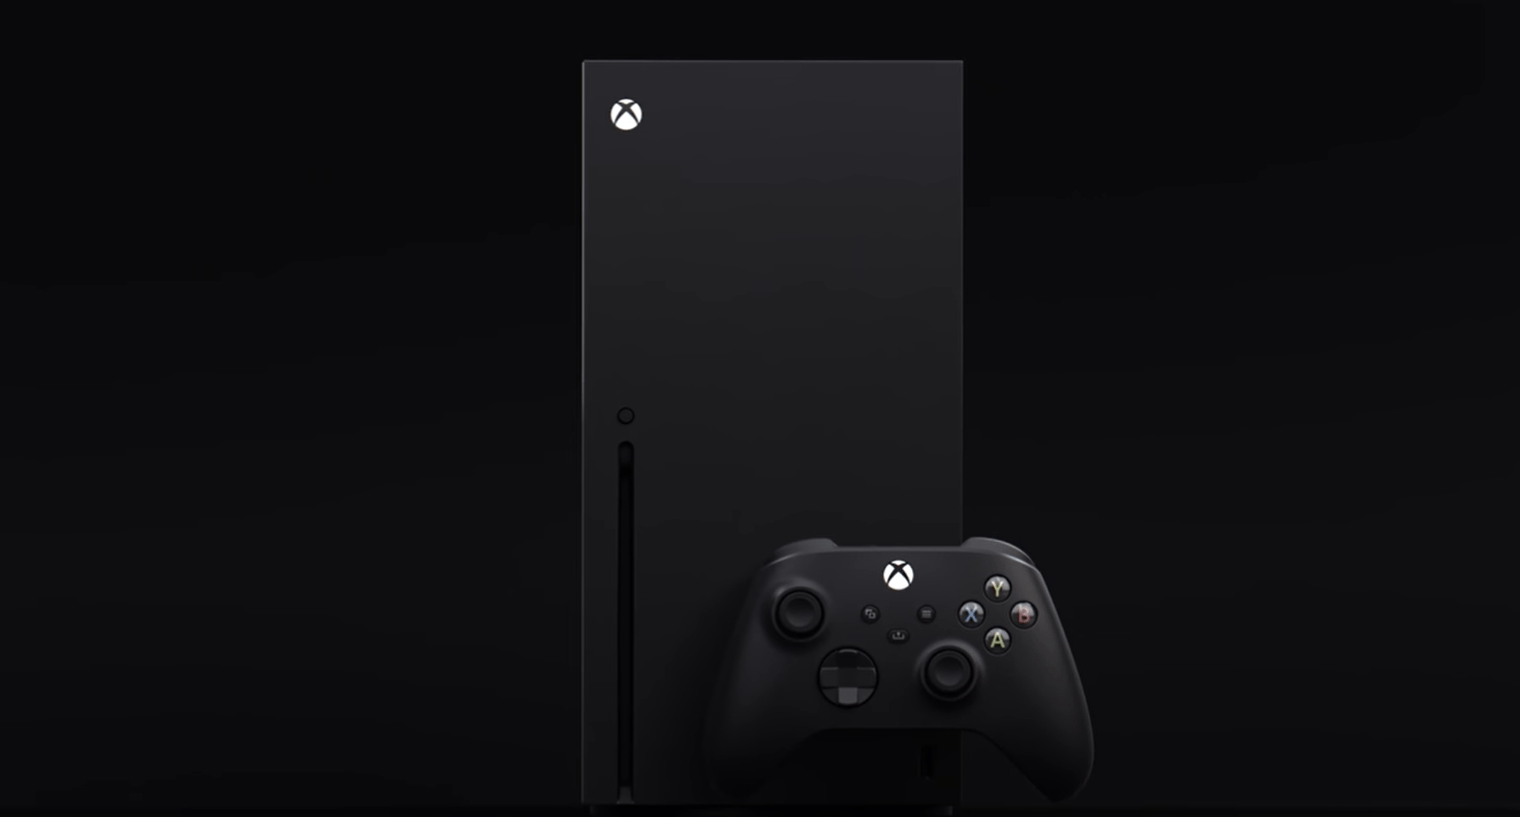 Trump Tariffs Won’t Impact The Price Of The Xbox Series X Or PlayStation 5 Consoles